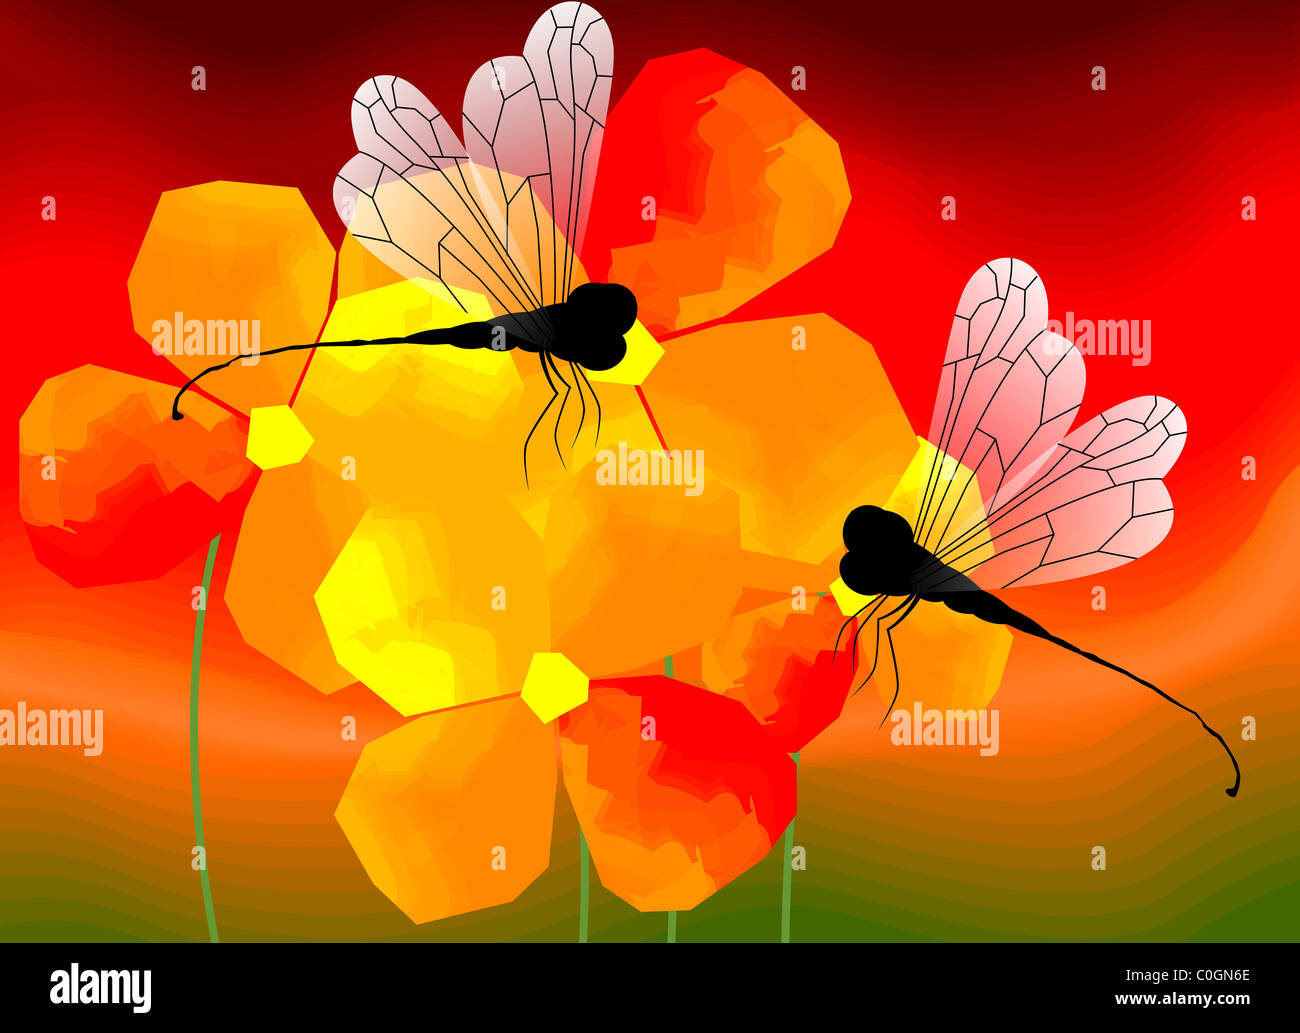 Digital painting of butterfly. The artist is experiencing the beauty of dragon flies sitting on the petals of flowers. Stock Photo